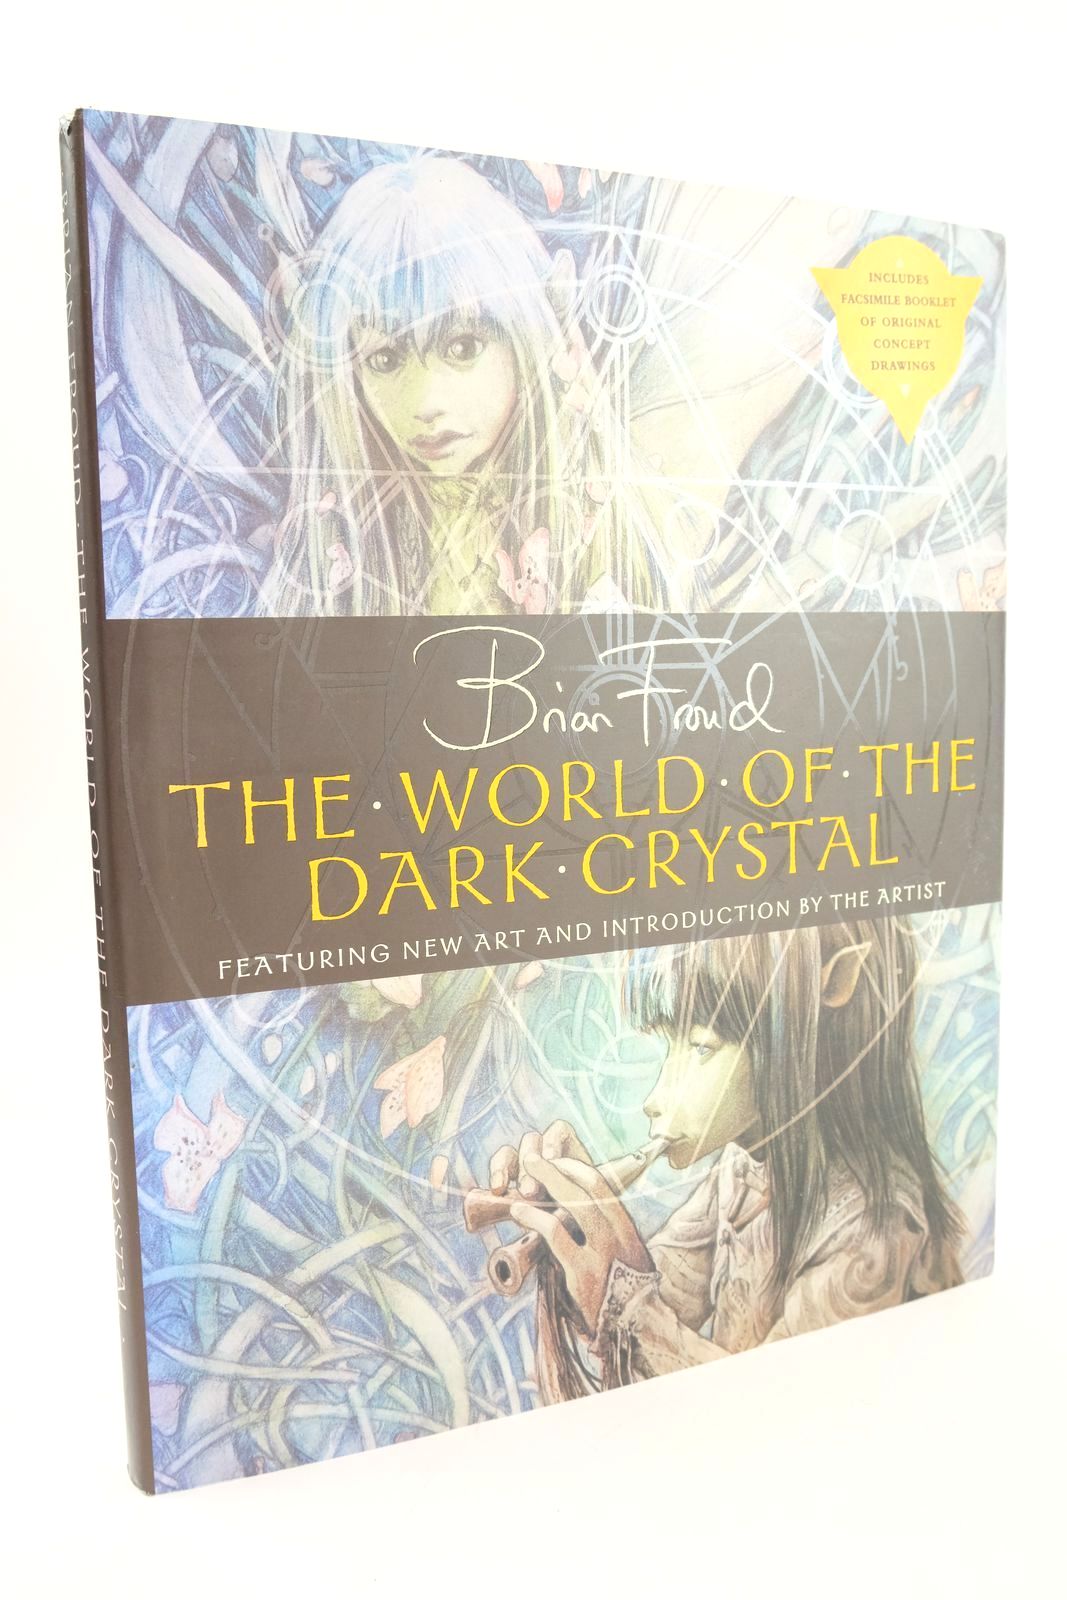 Photo of THE WORLD OF THE DARK CRYSTAL written by Llewellyn, J.J. Henson, Jim Brown, Rupert illustrated by Froud, Brian published by Pavilion Books (STOCK CODE: 1324878)  for sale by Stella & Rose's Books